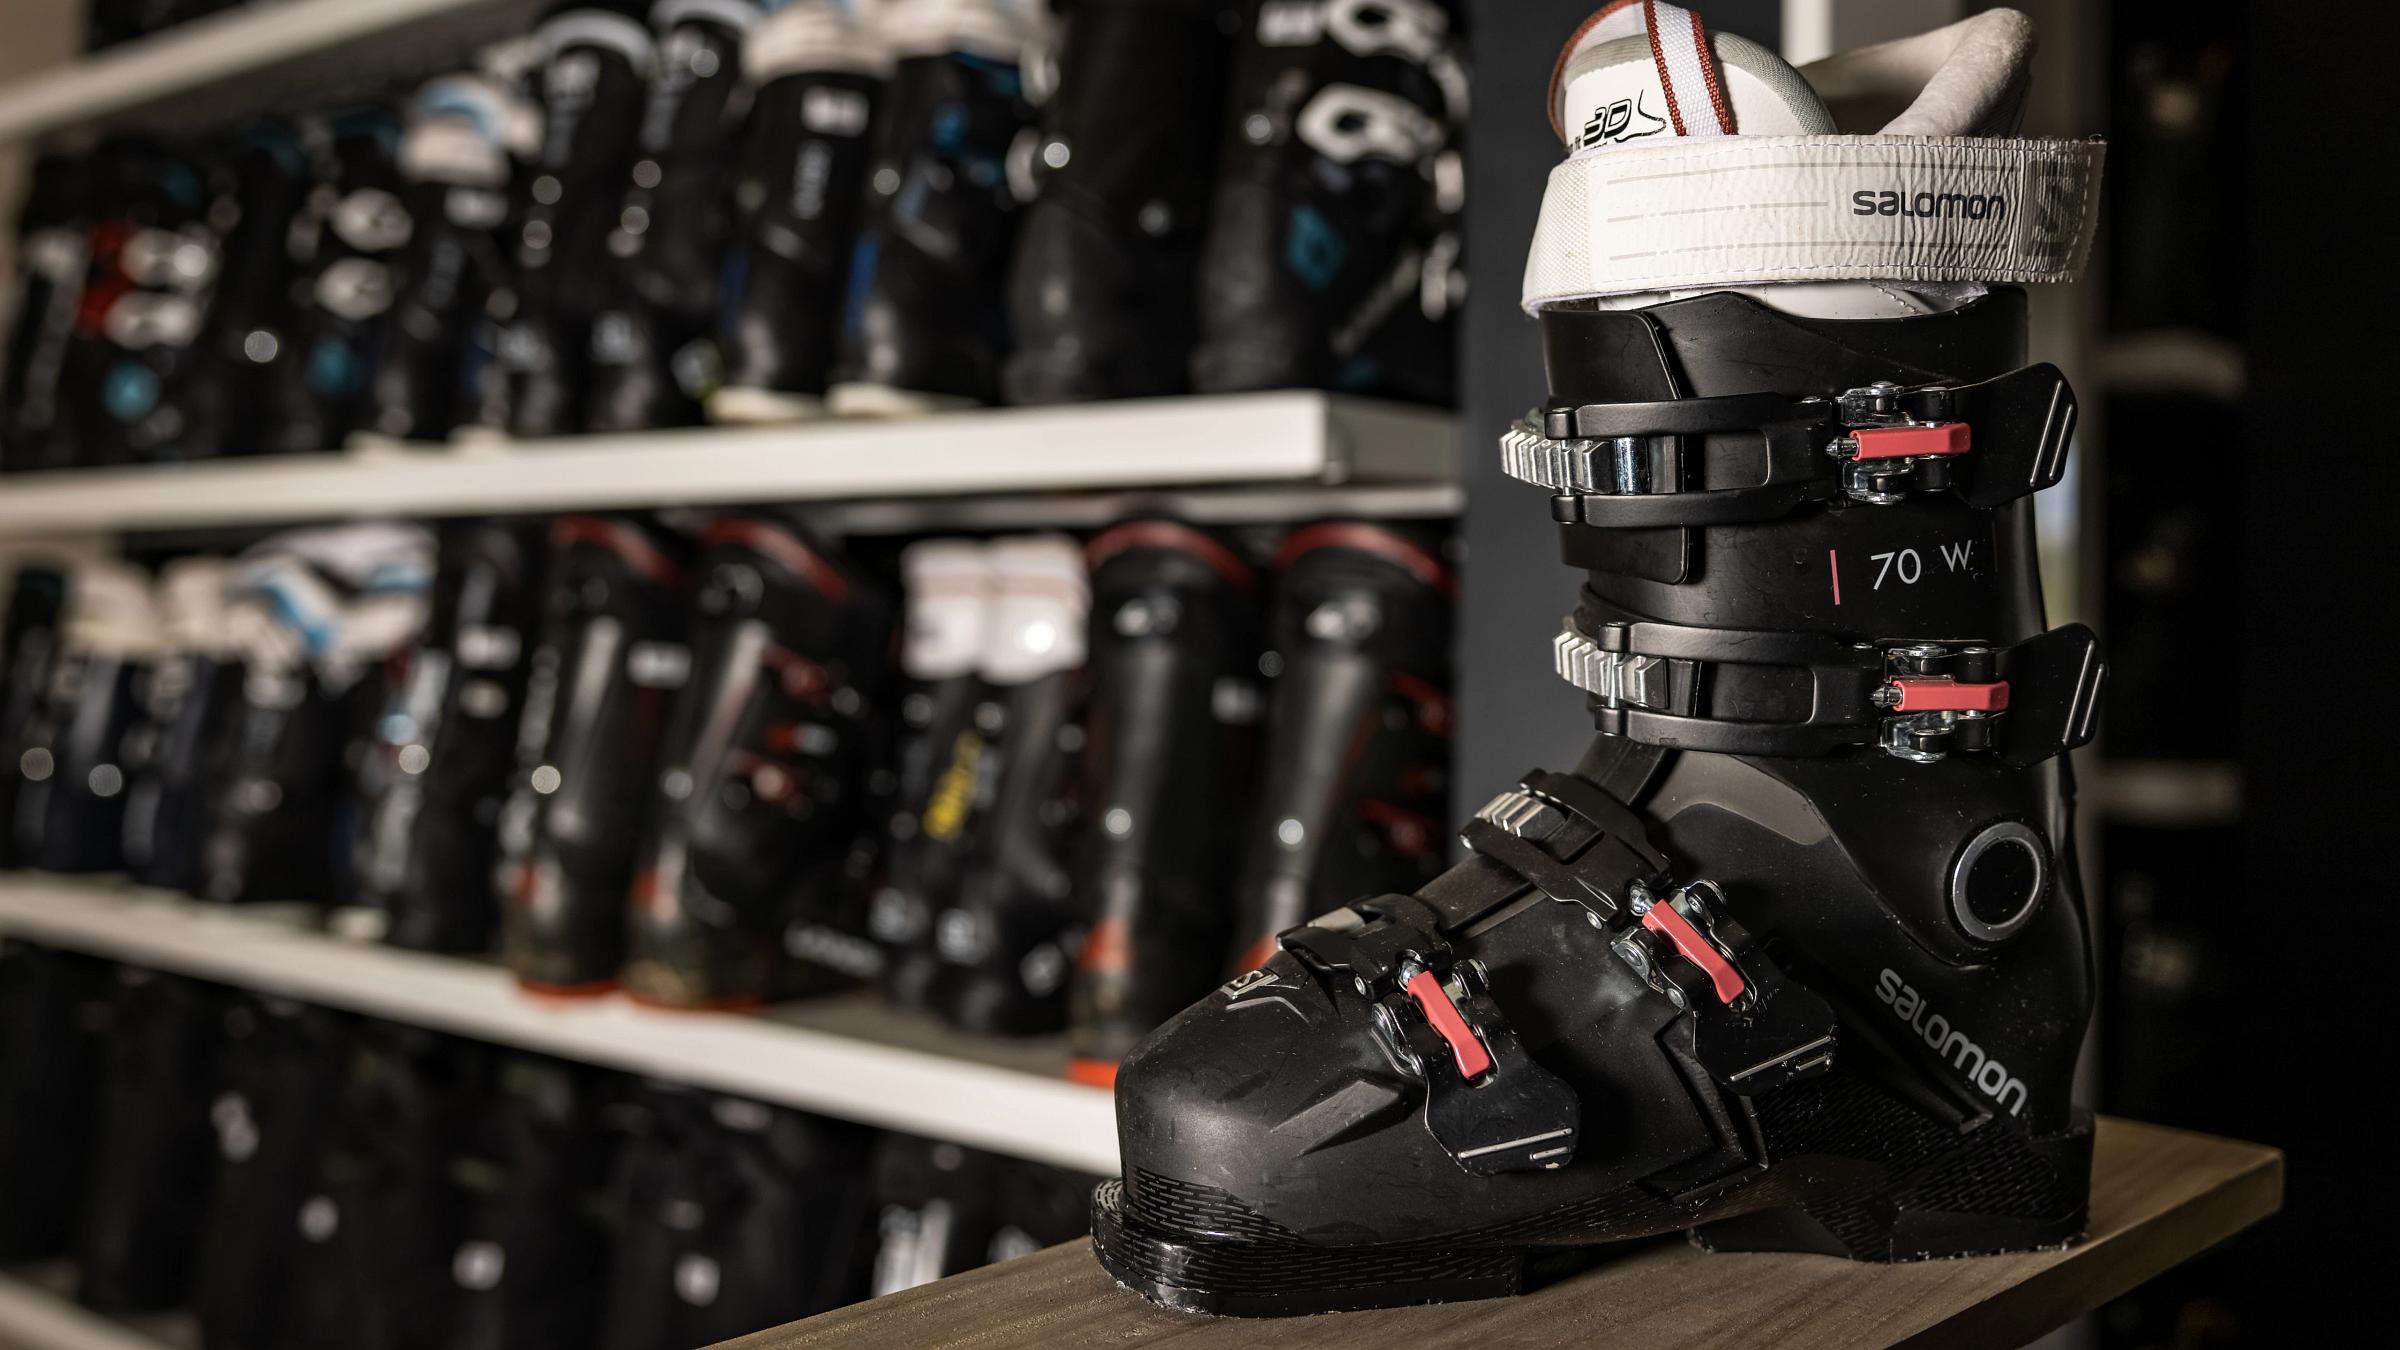 Product photo of a ski boot